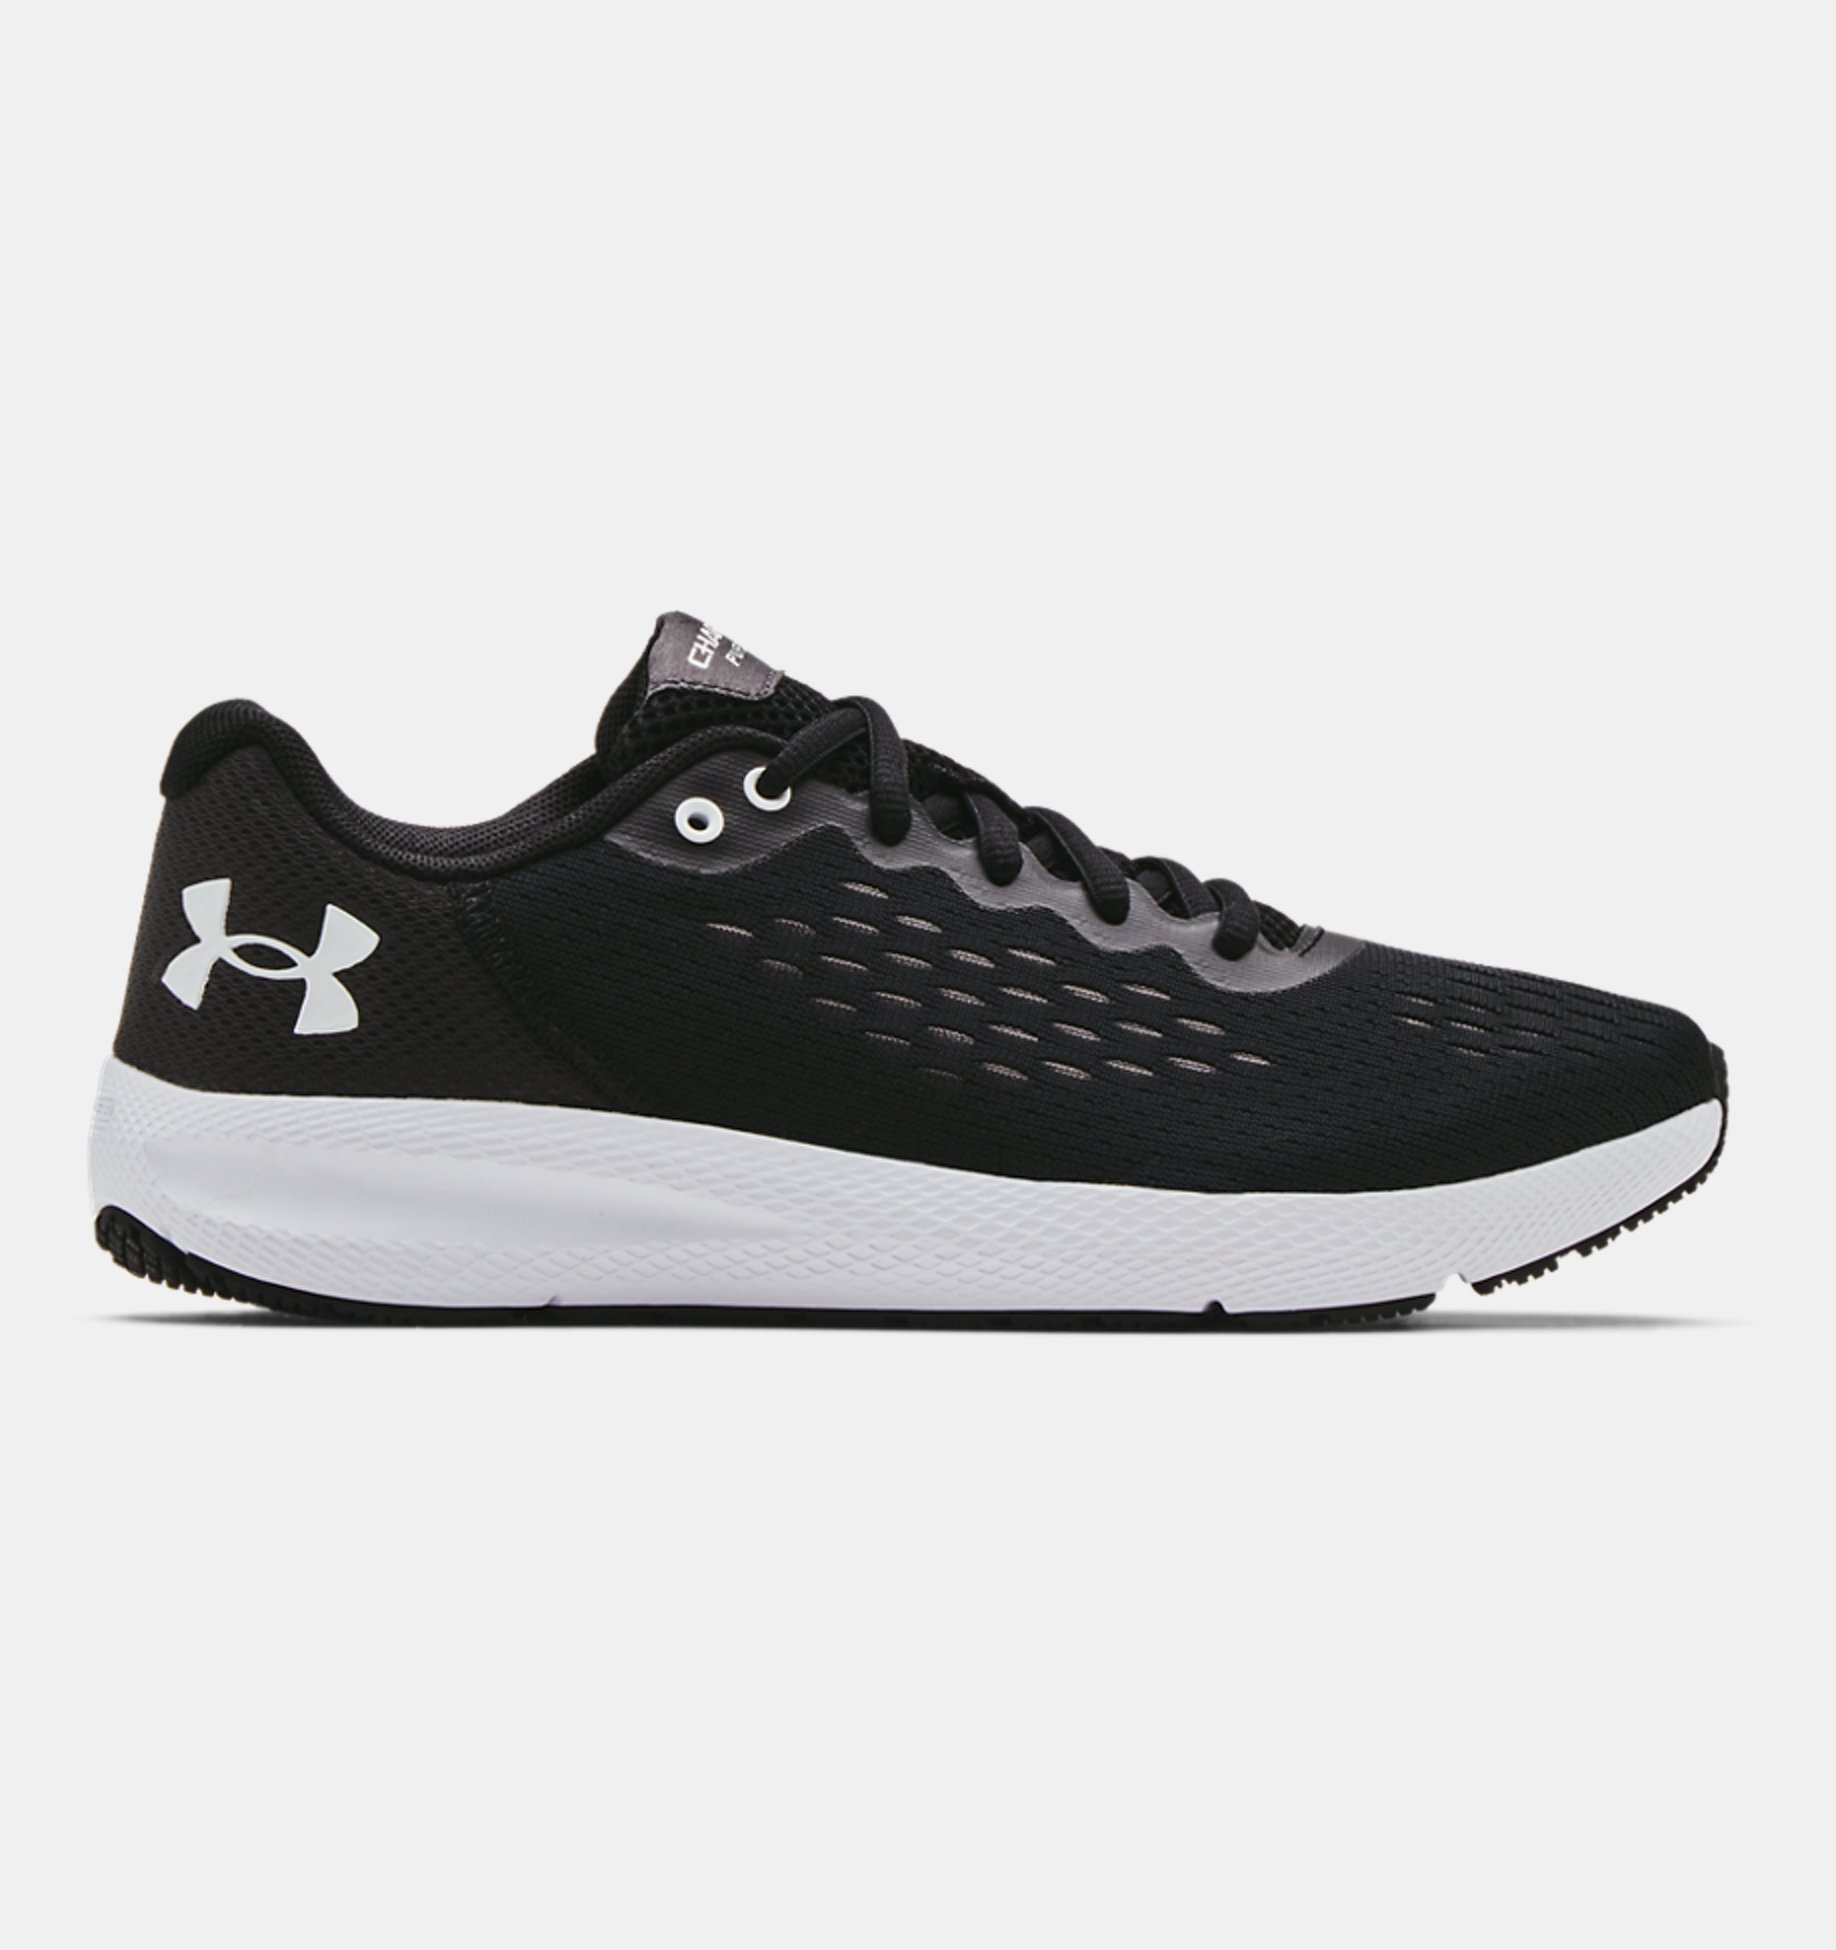 Underarmour Womens UA Charged Pursuit 2 SE Running Shoes